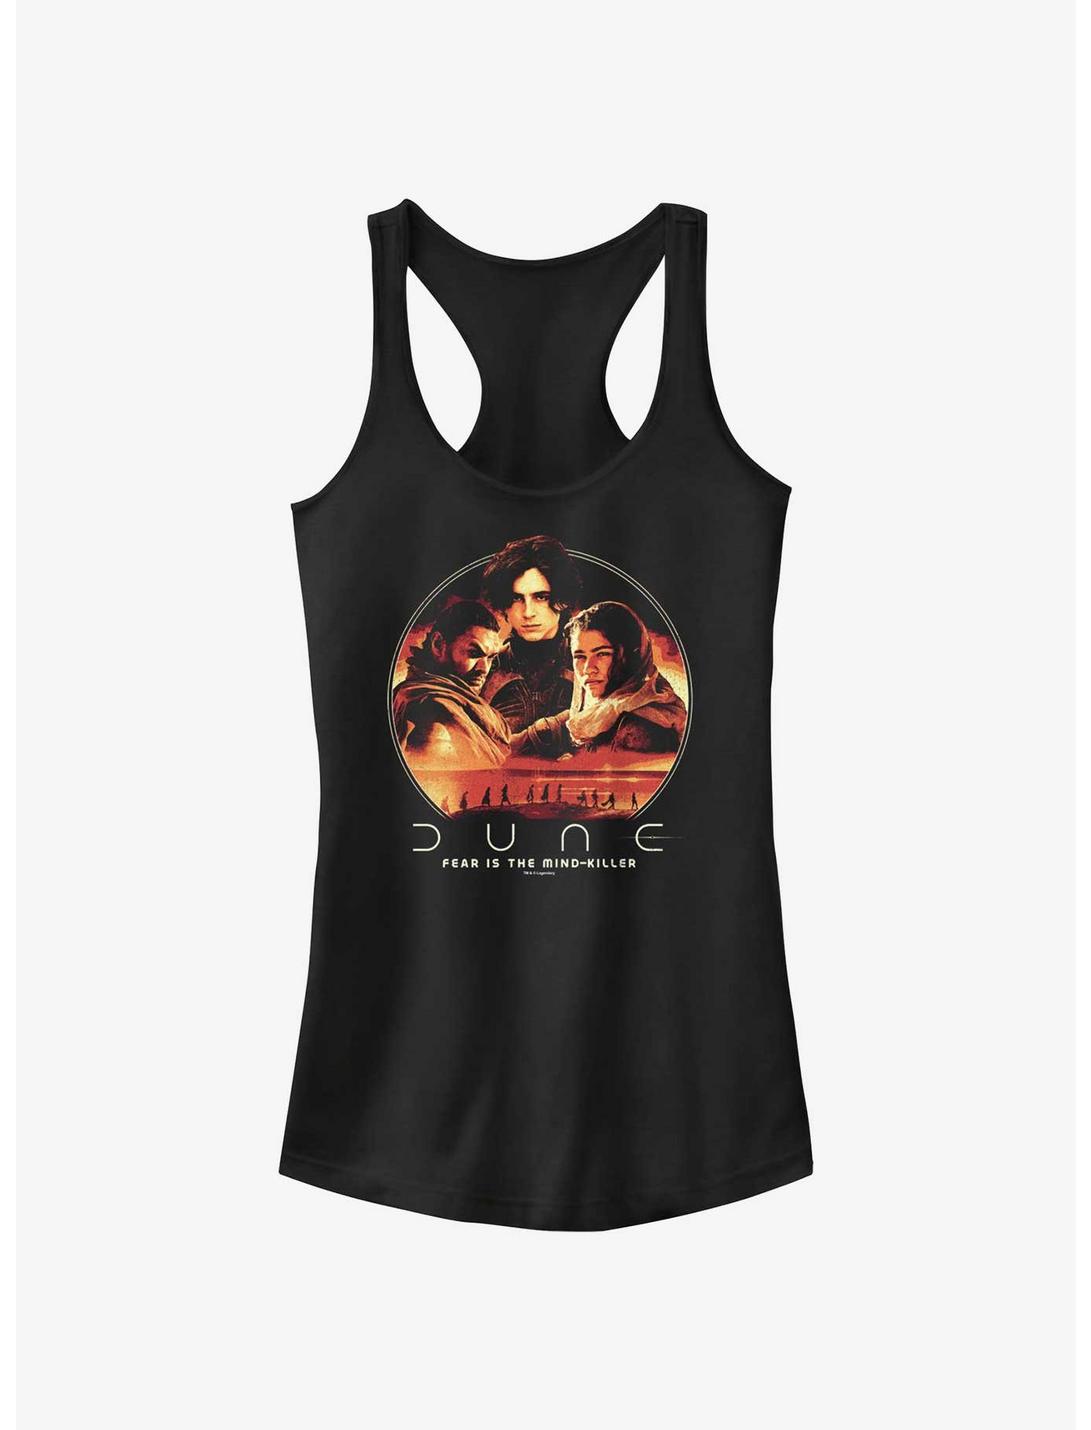 Dune: Part Two Fear Is The Mind-Killer Girls Tank, BLACK, hi-res